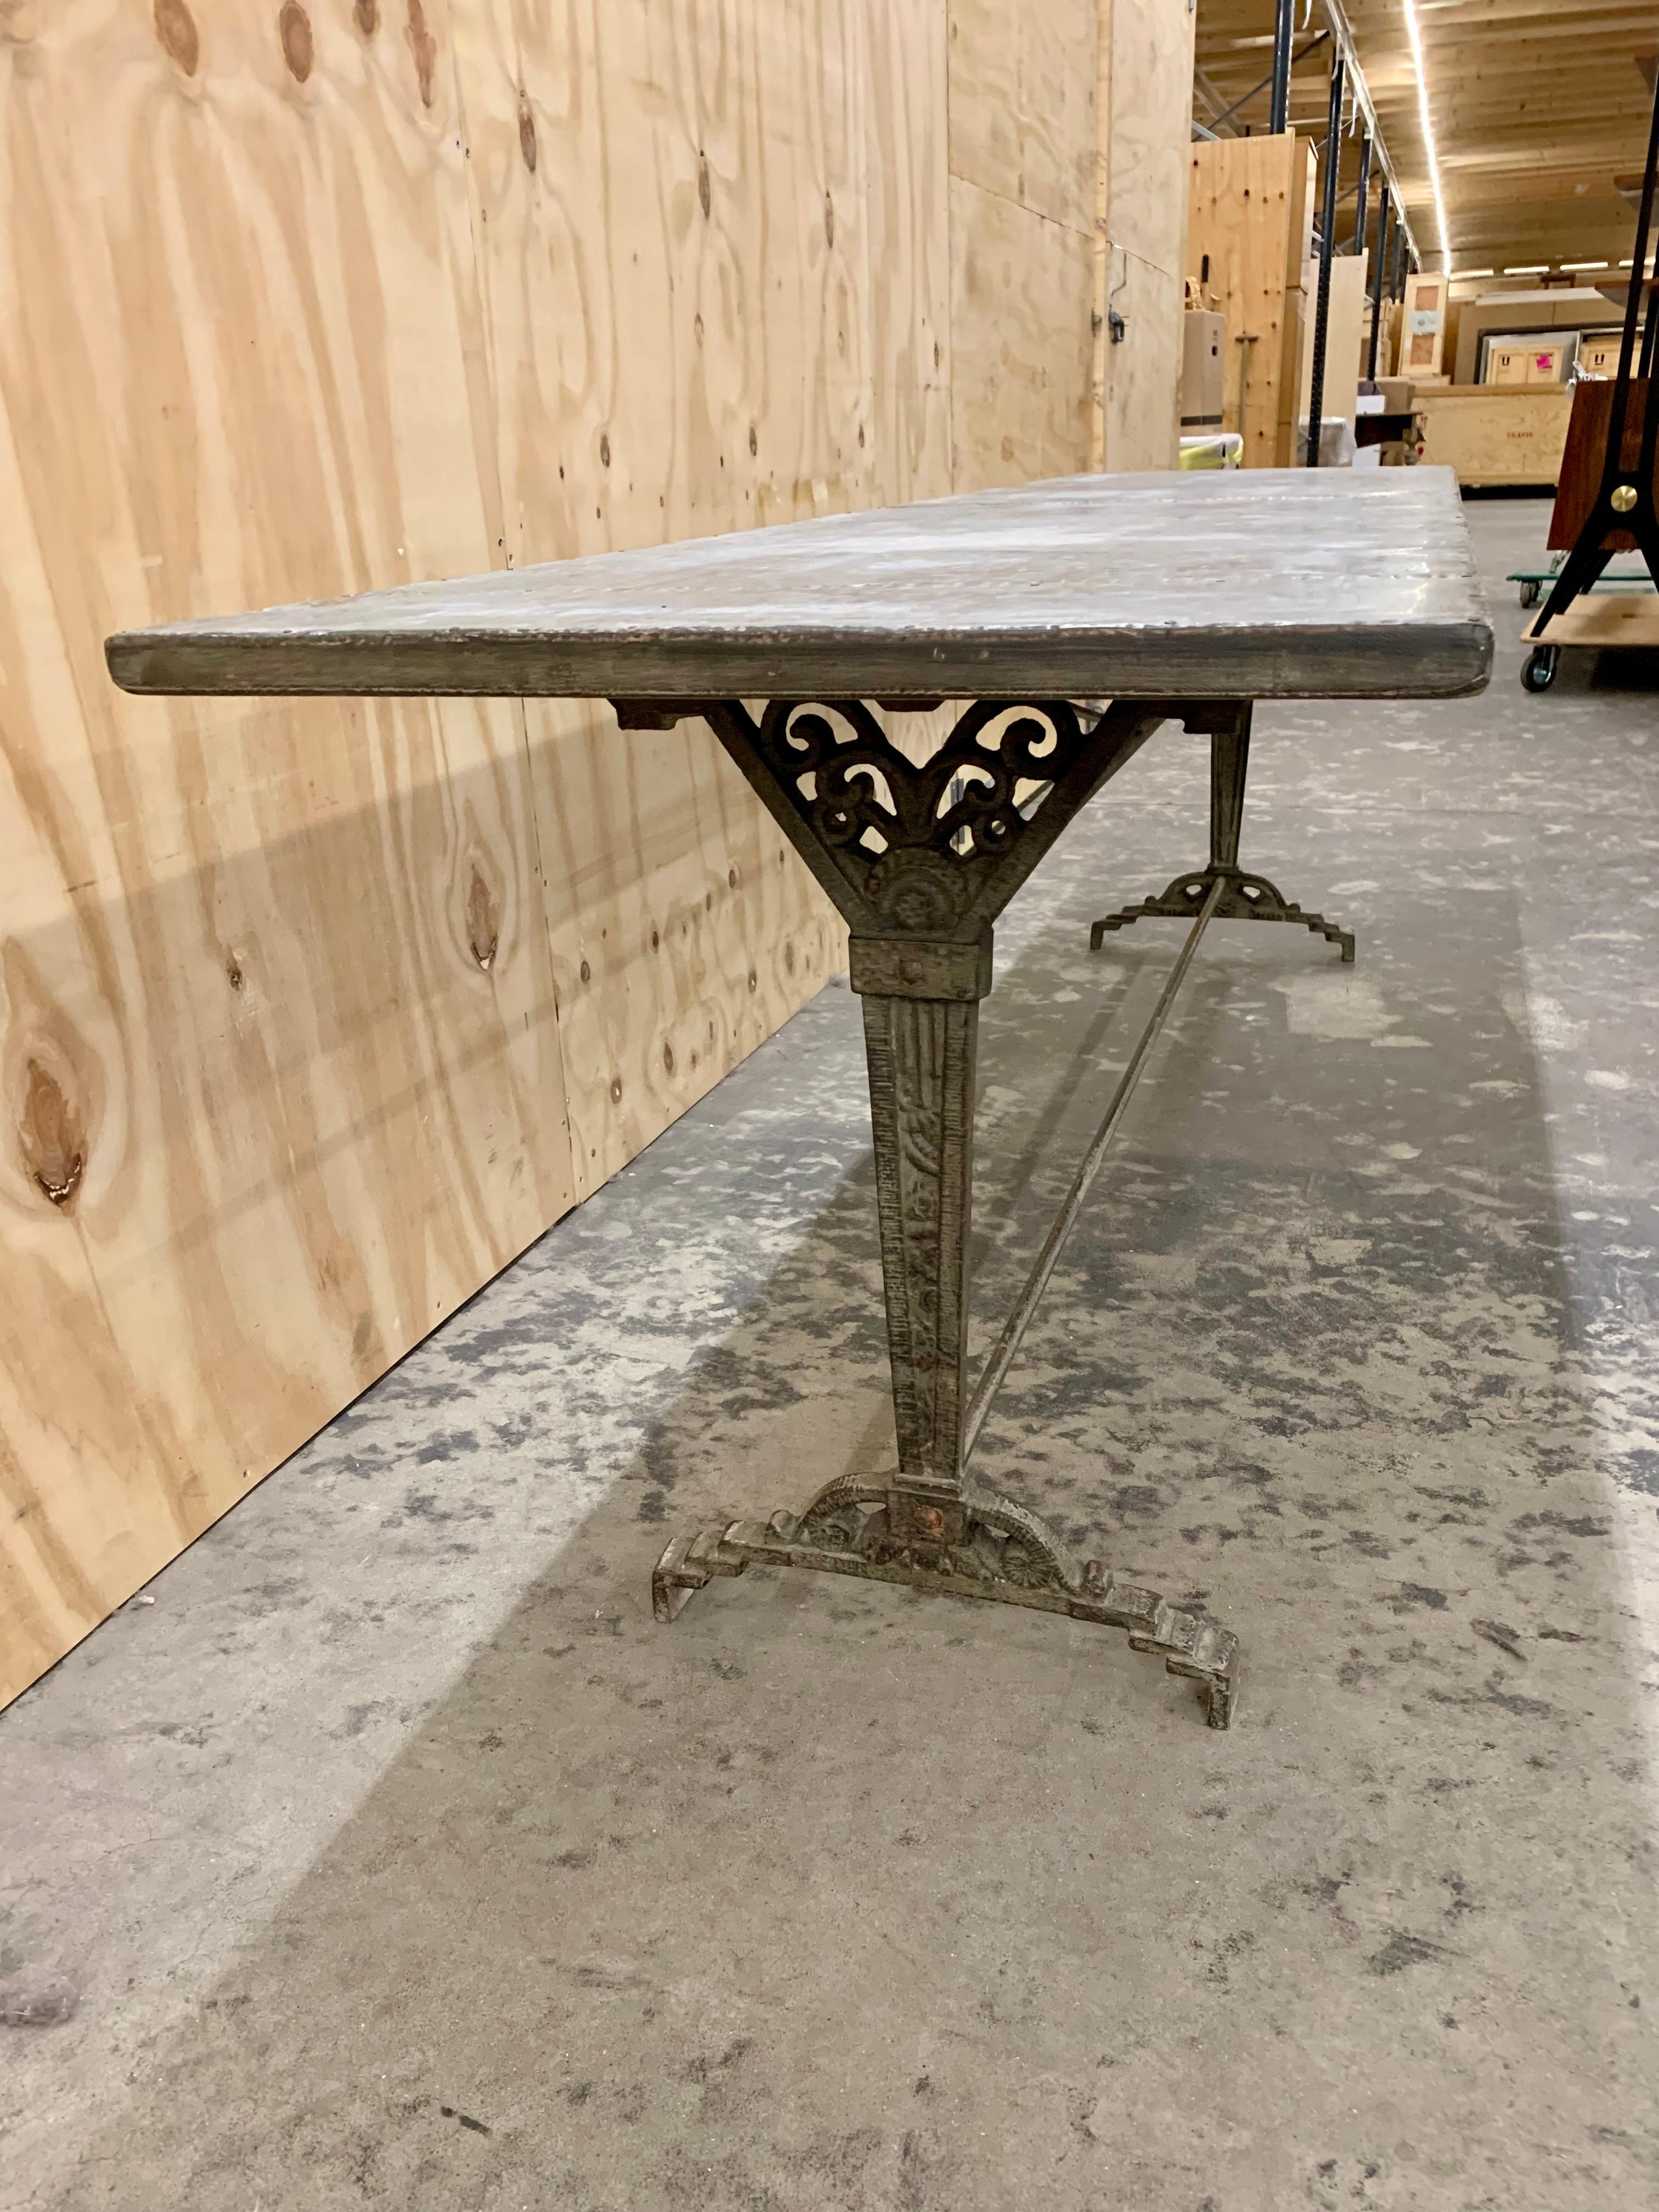 Beautiful and rare French antique Art Deco bistro table with a decorative cast iron base and a nitted metal table top. The table is unusually long and makes a fantastic dining table that can fit 8 people around it.
